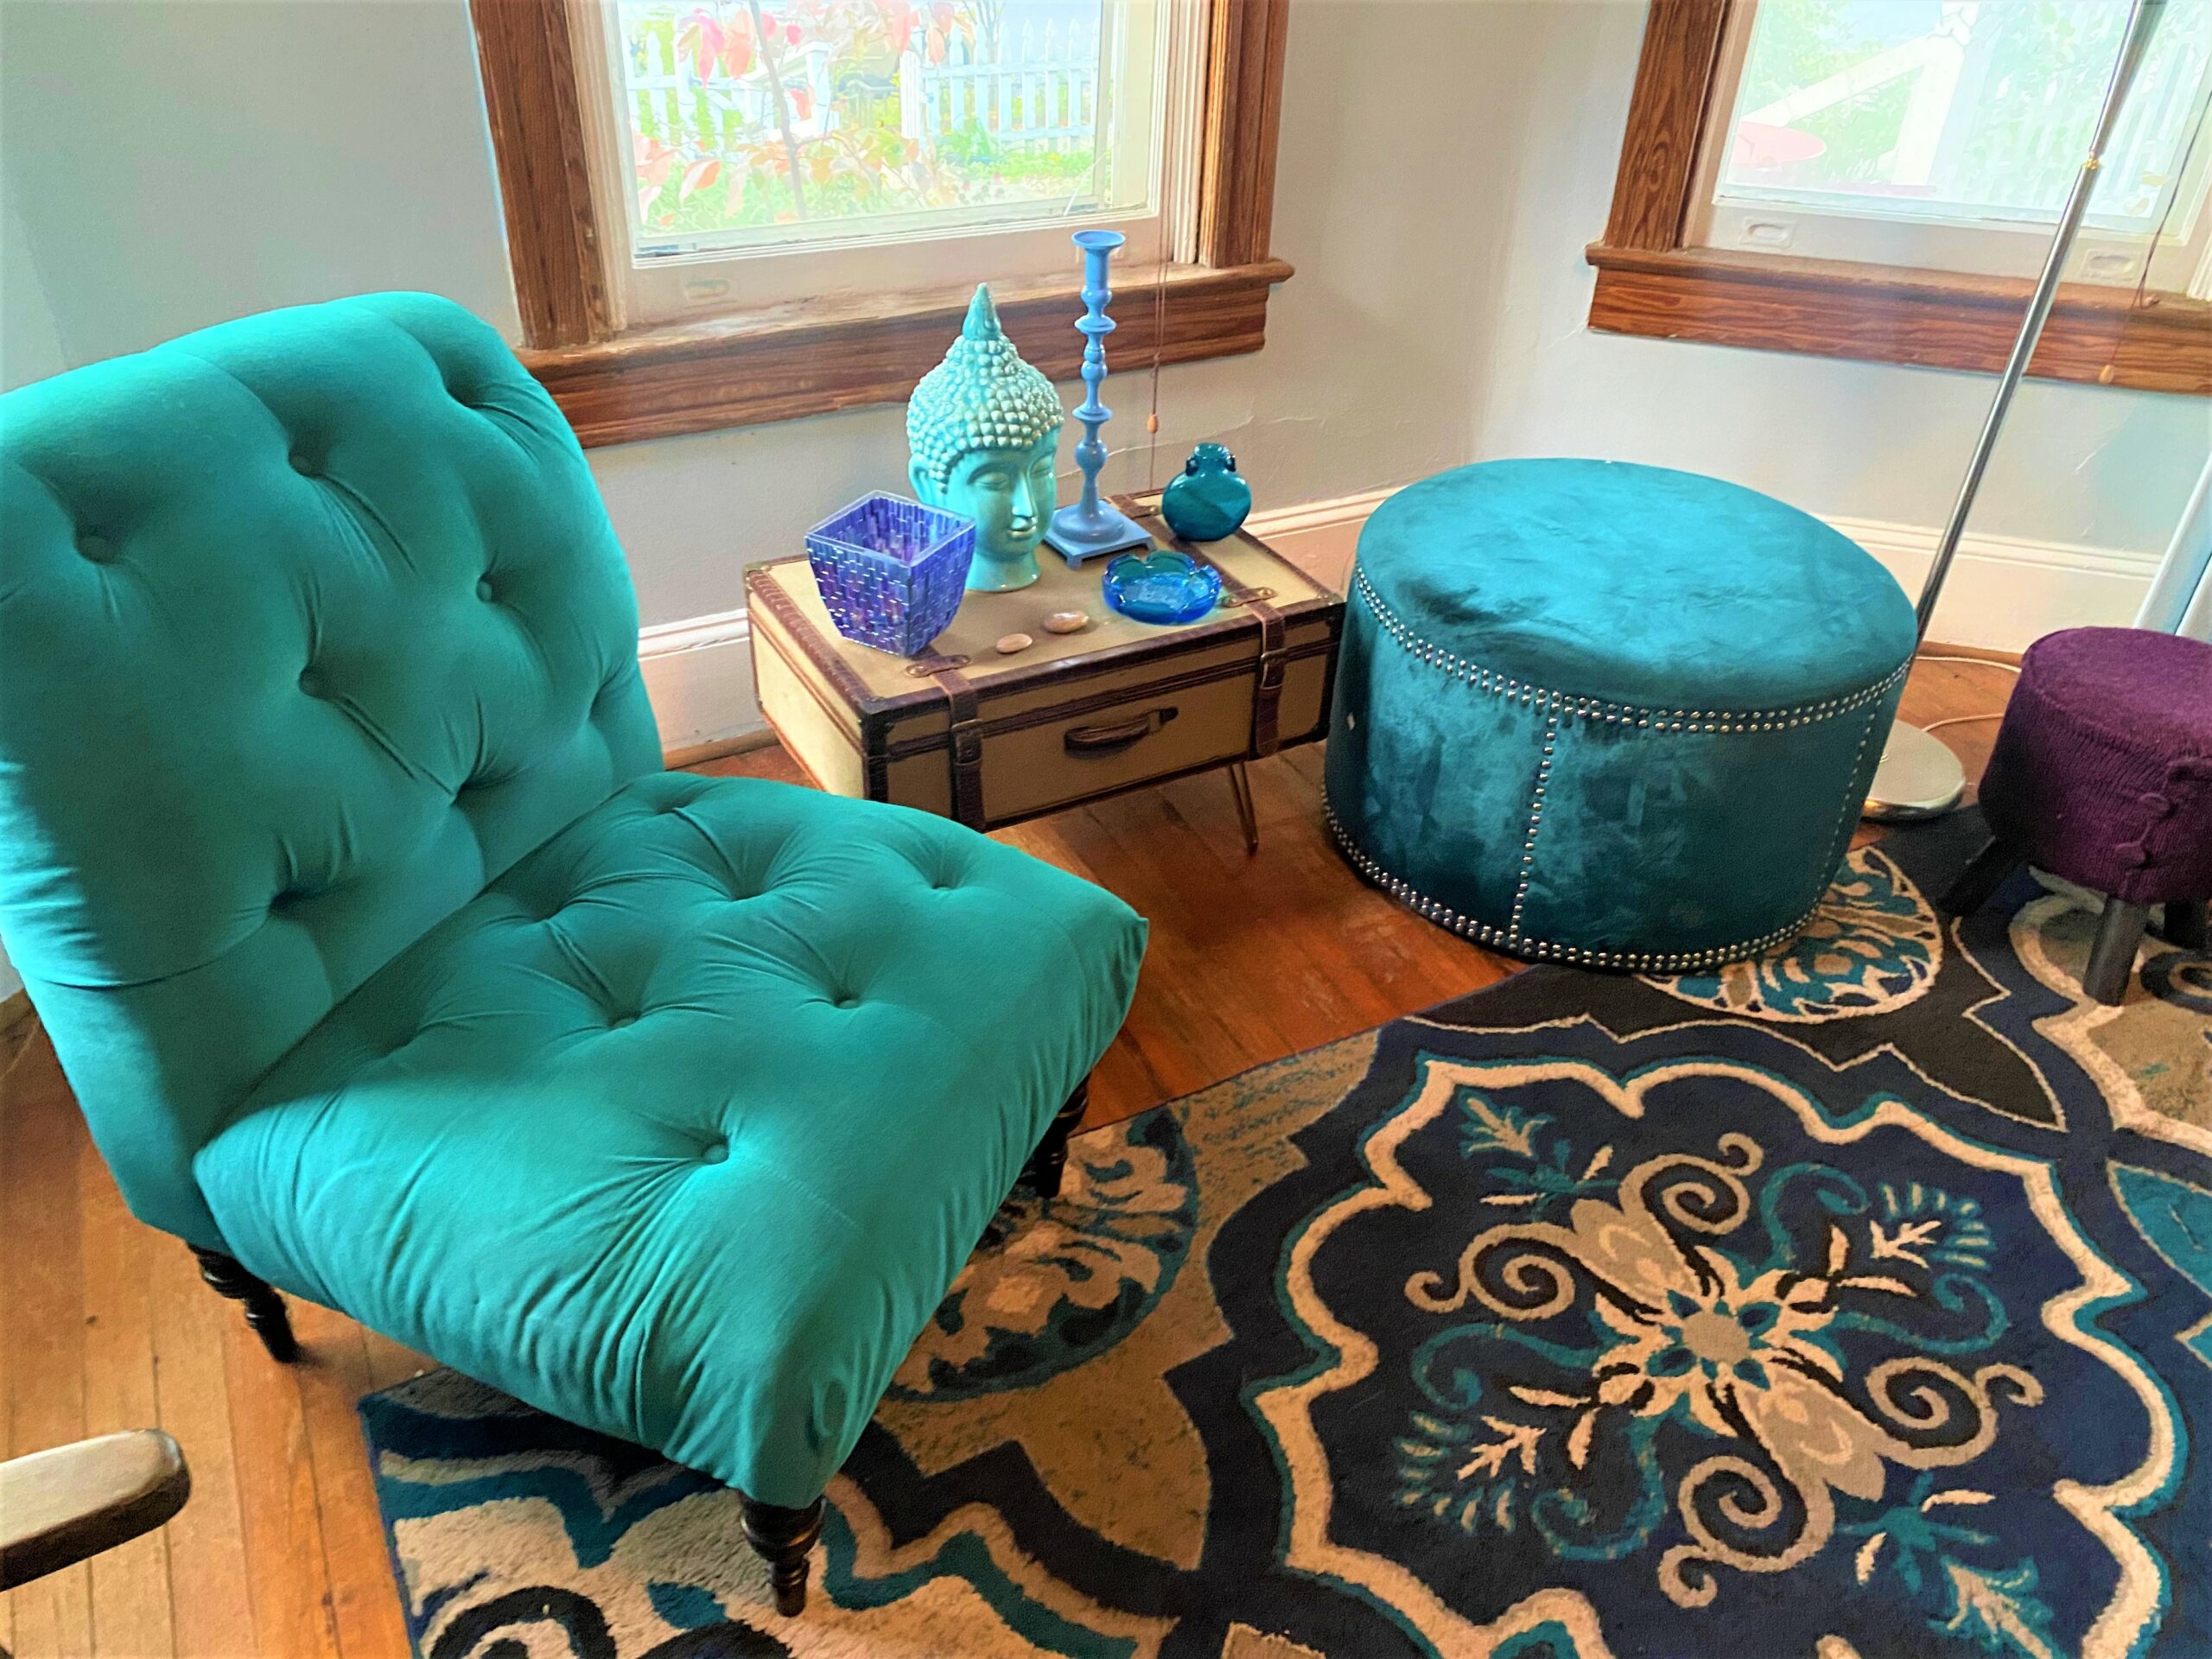 DIY: A Tired Chair Becomes a Spray-Painted Teal Masterpiece